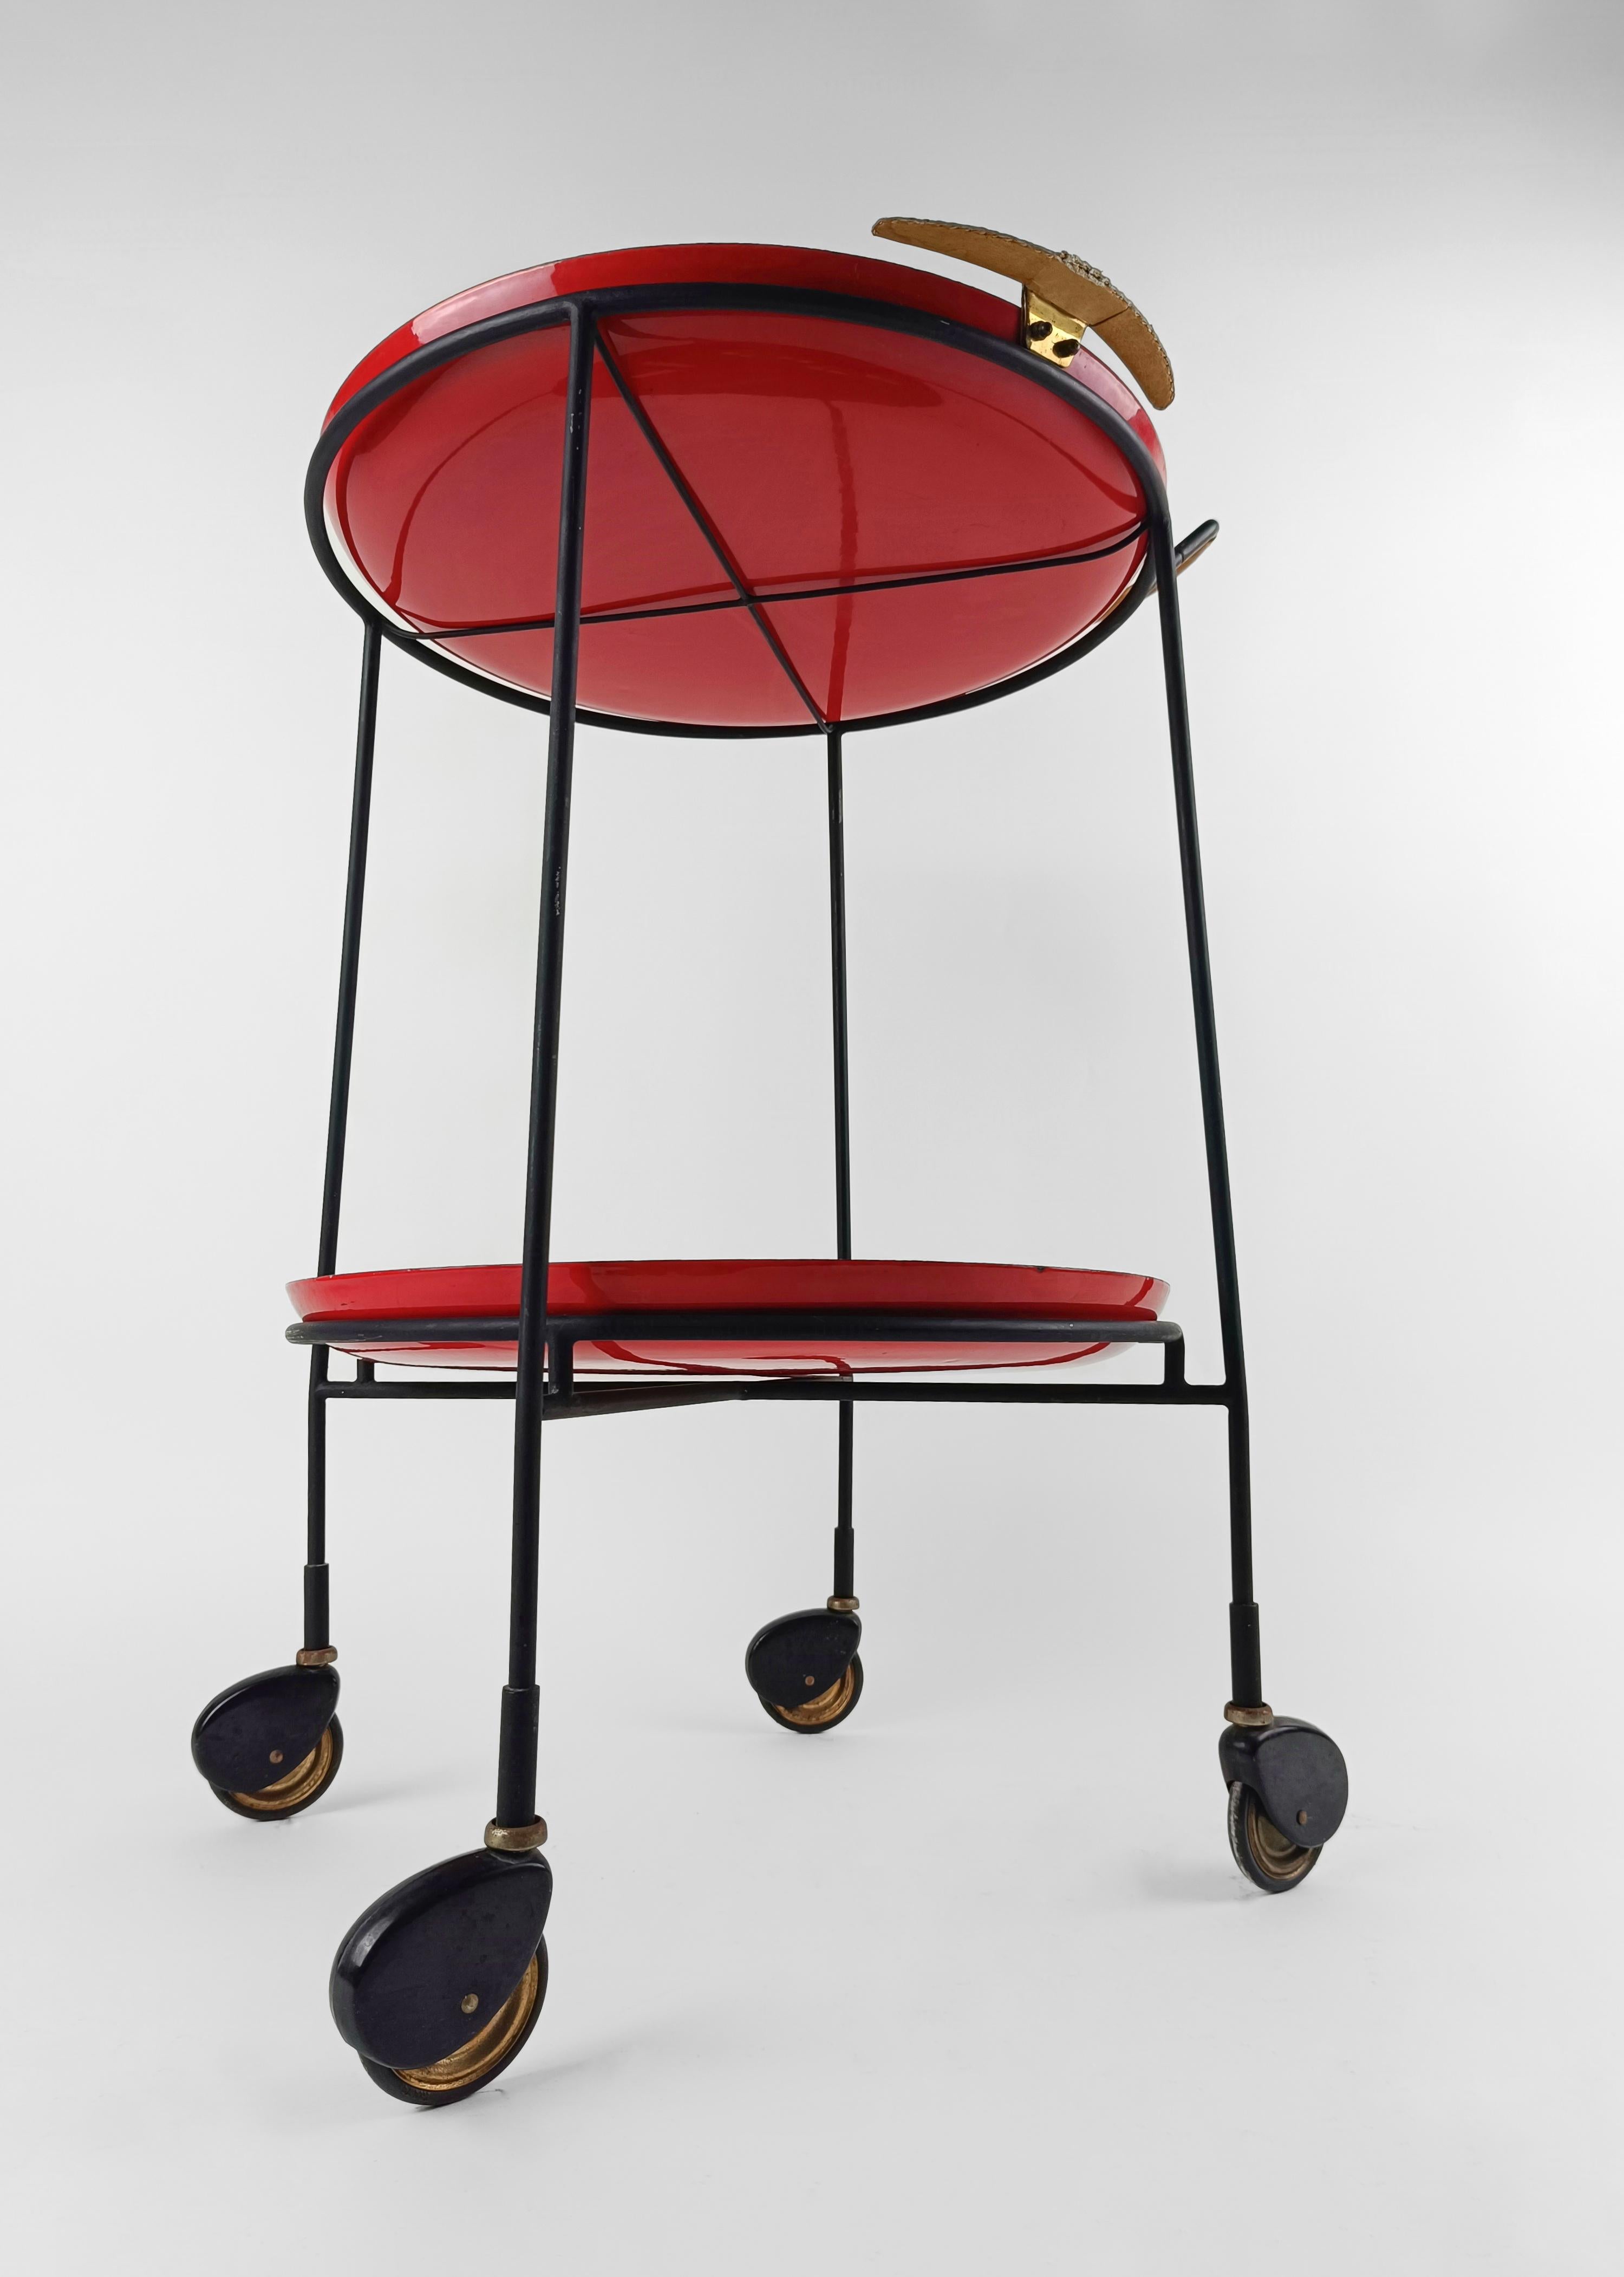 Italian Mid-Century Rounded Cart by Siva Poggibonsi with a De Stijl decoration For Sale 3